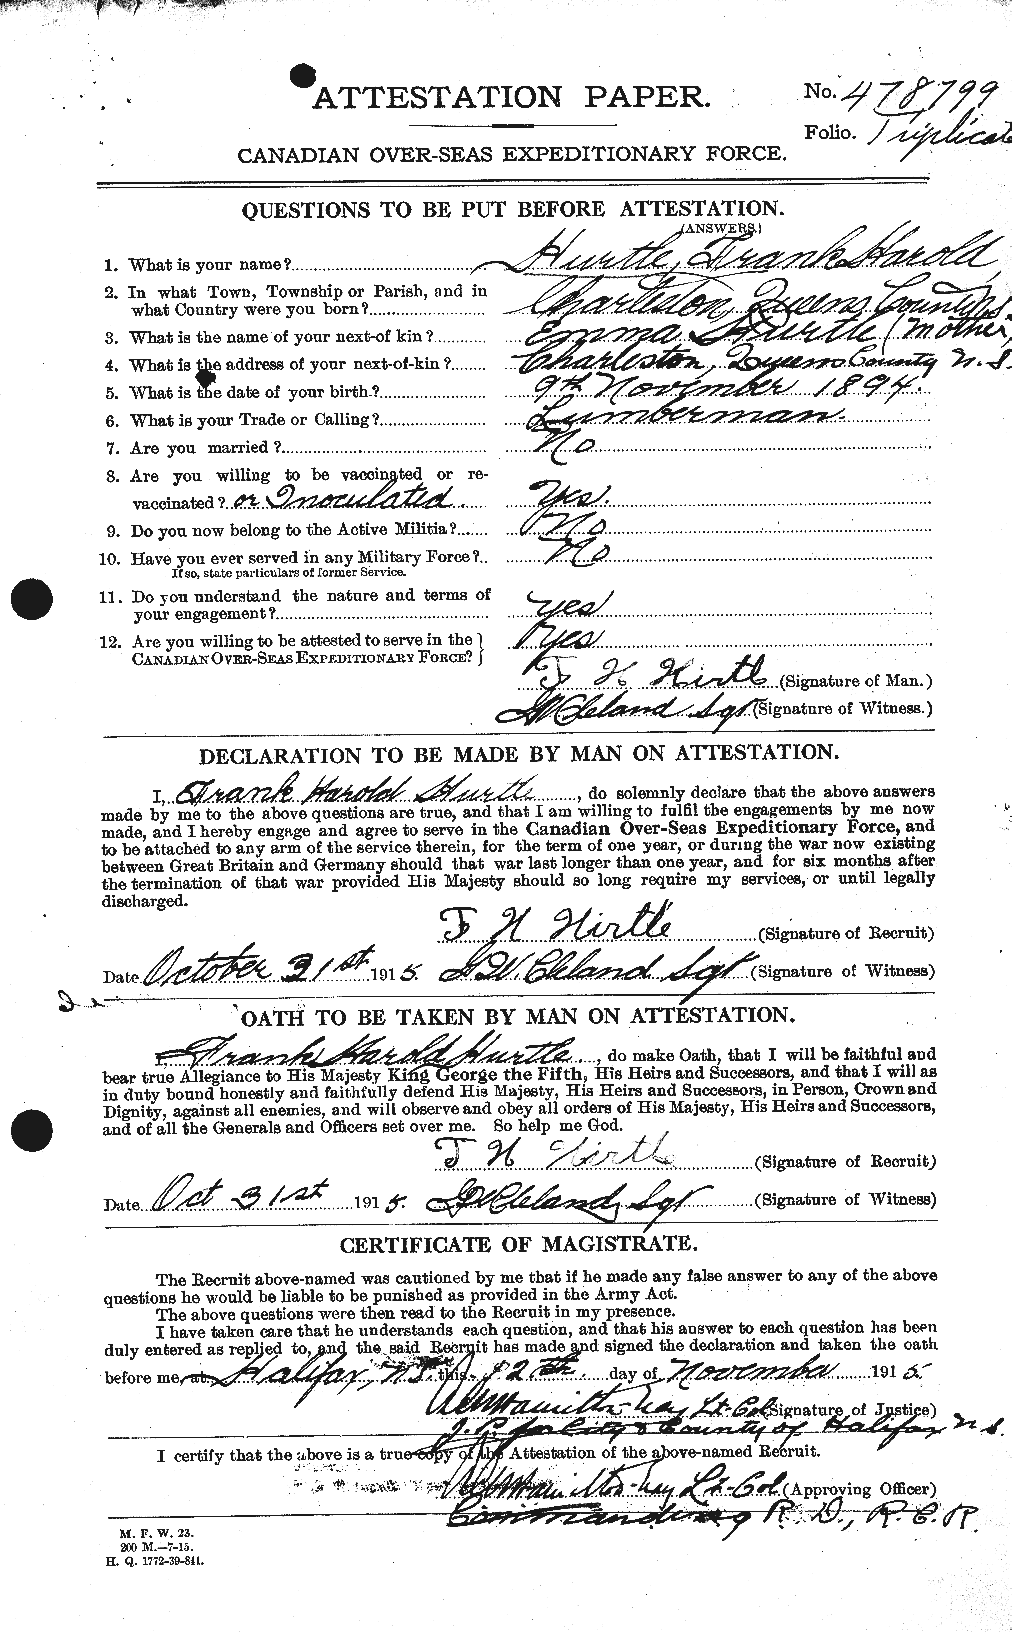 Personnel Records of the First World War - CEF 397337a